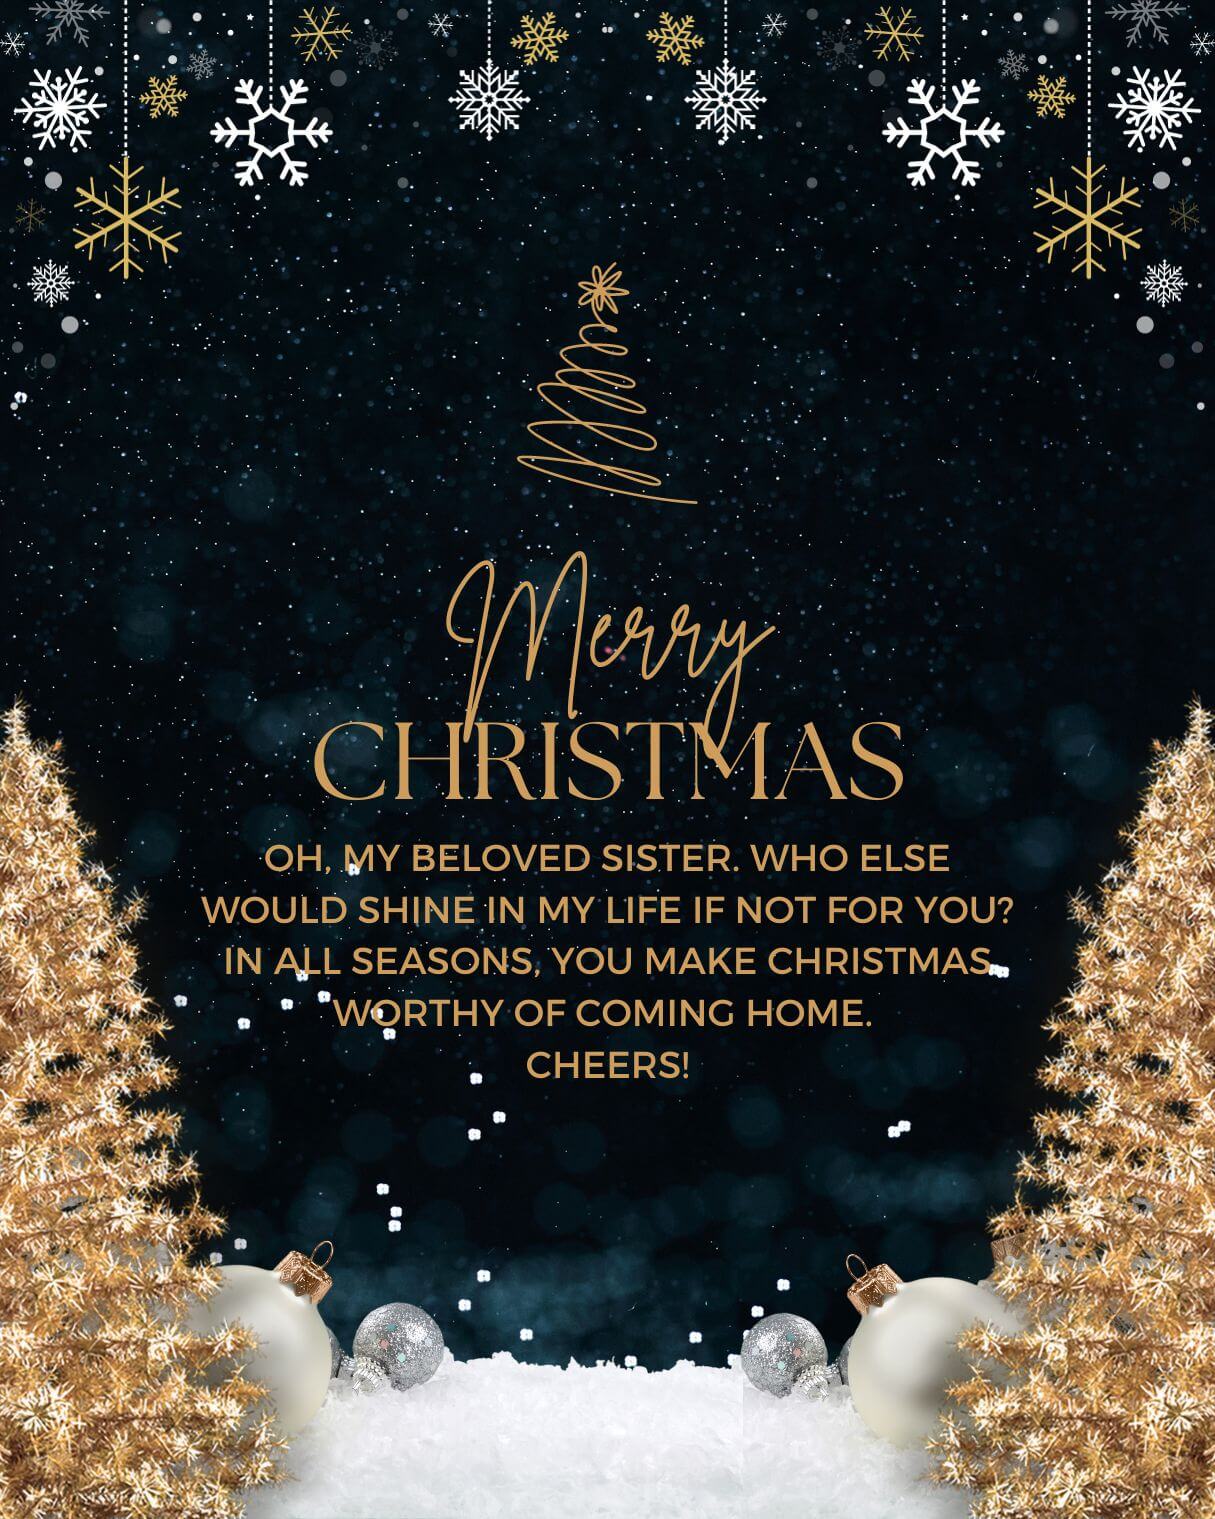 Merry Christmas Messages For Sister